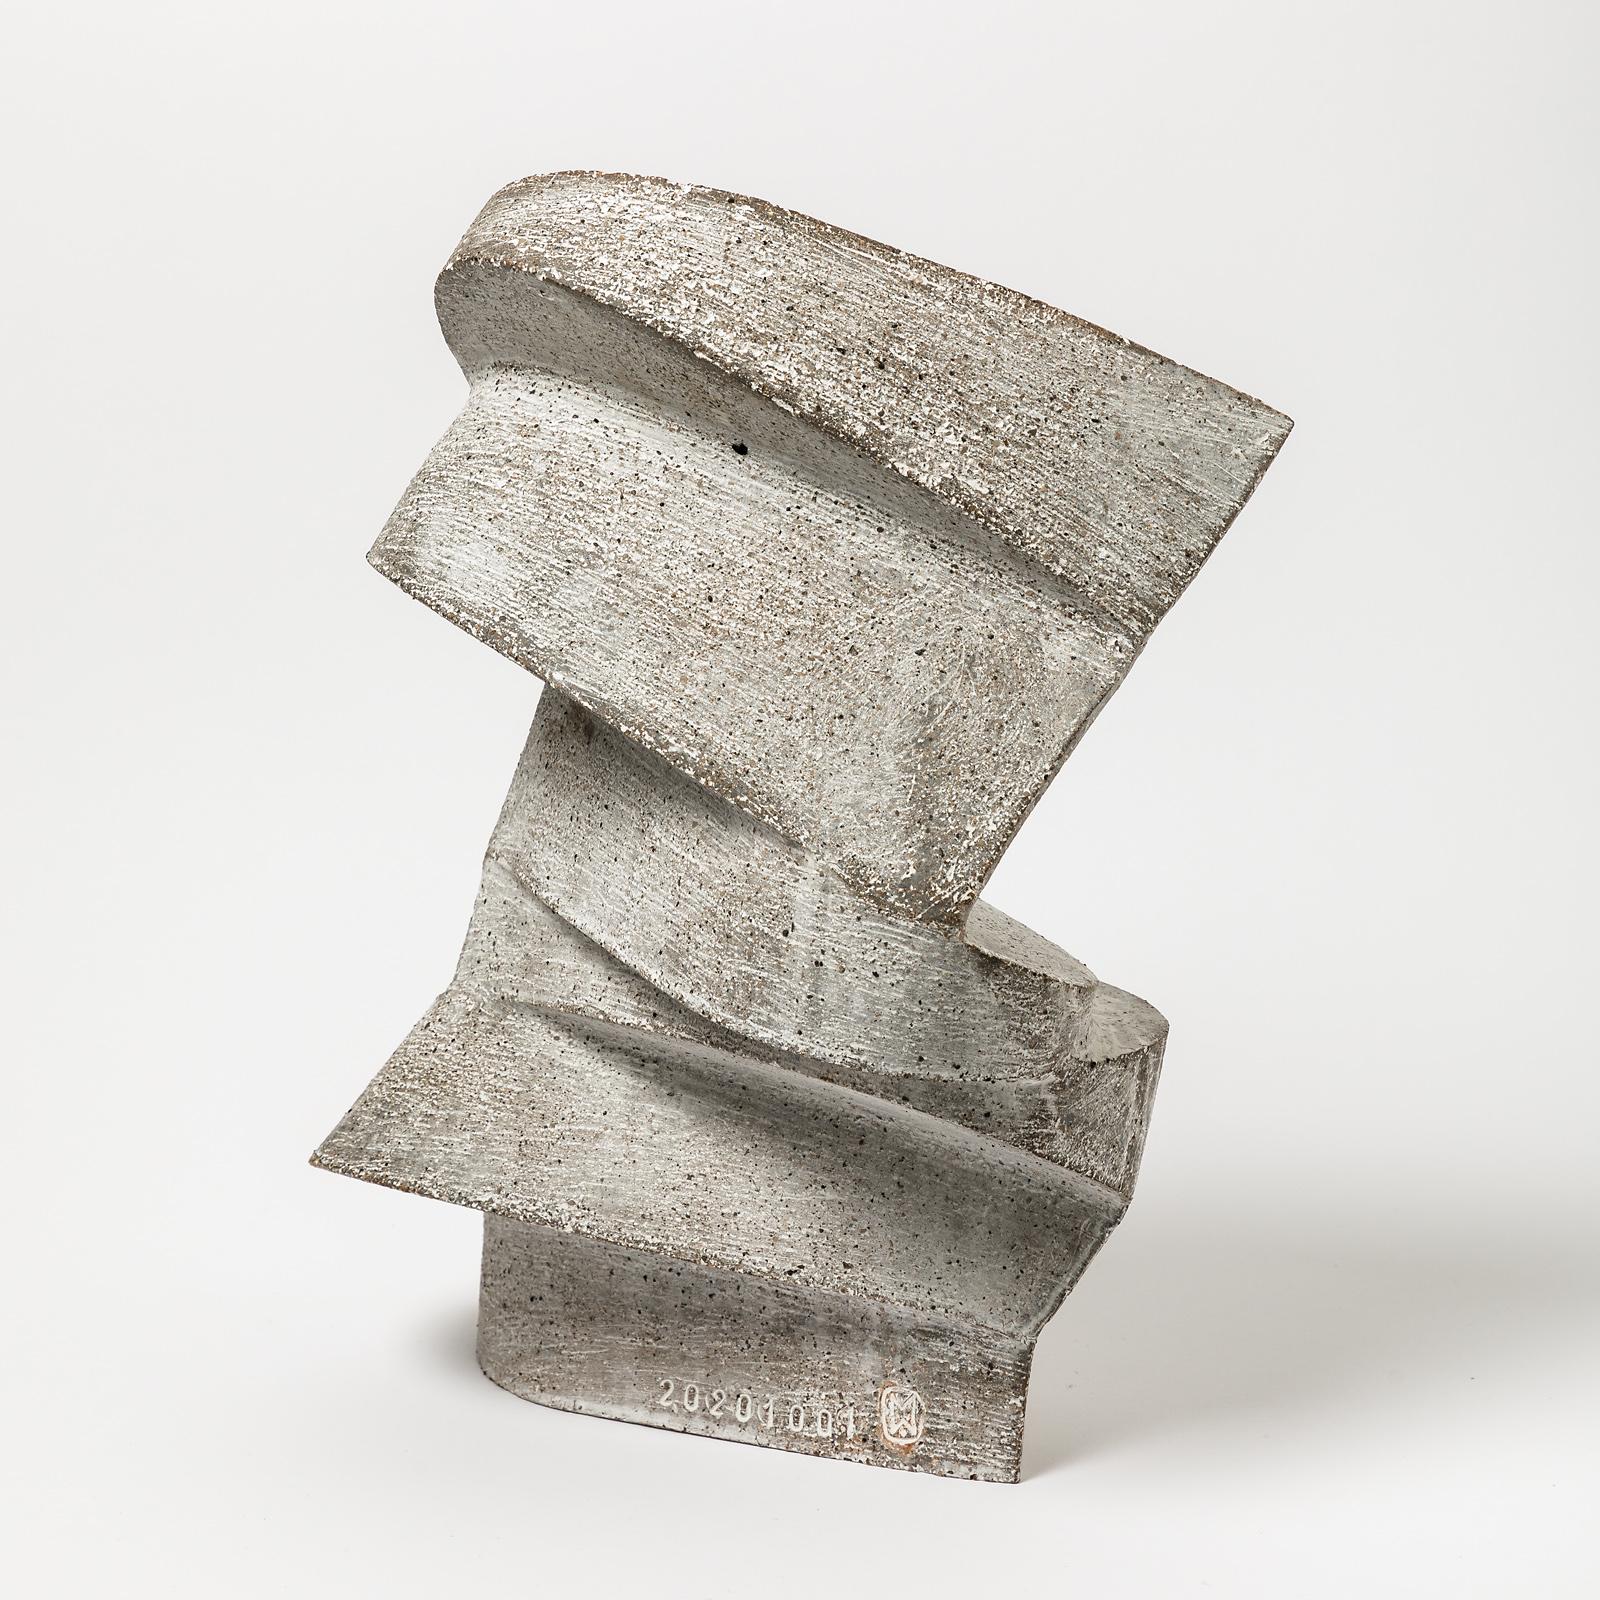 French Stoneware Sculpture by Maarten Stuer, Entitled 